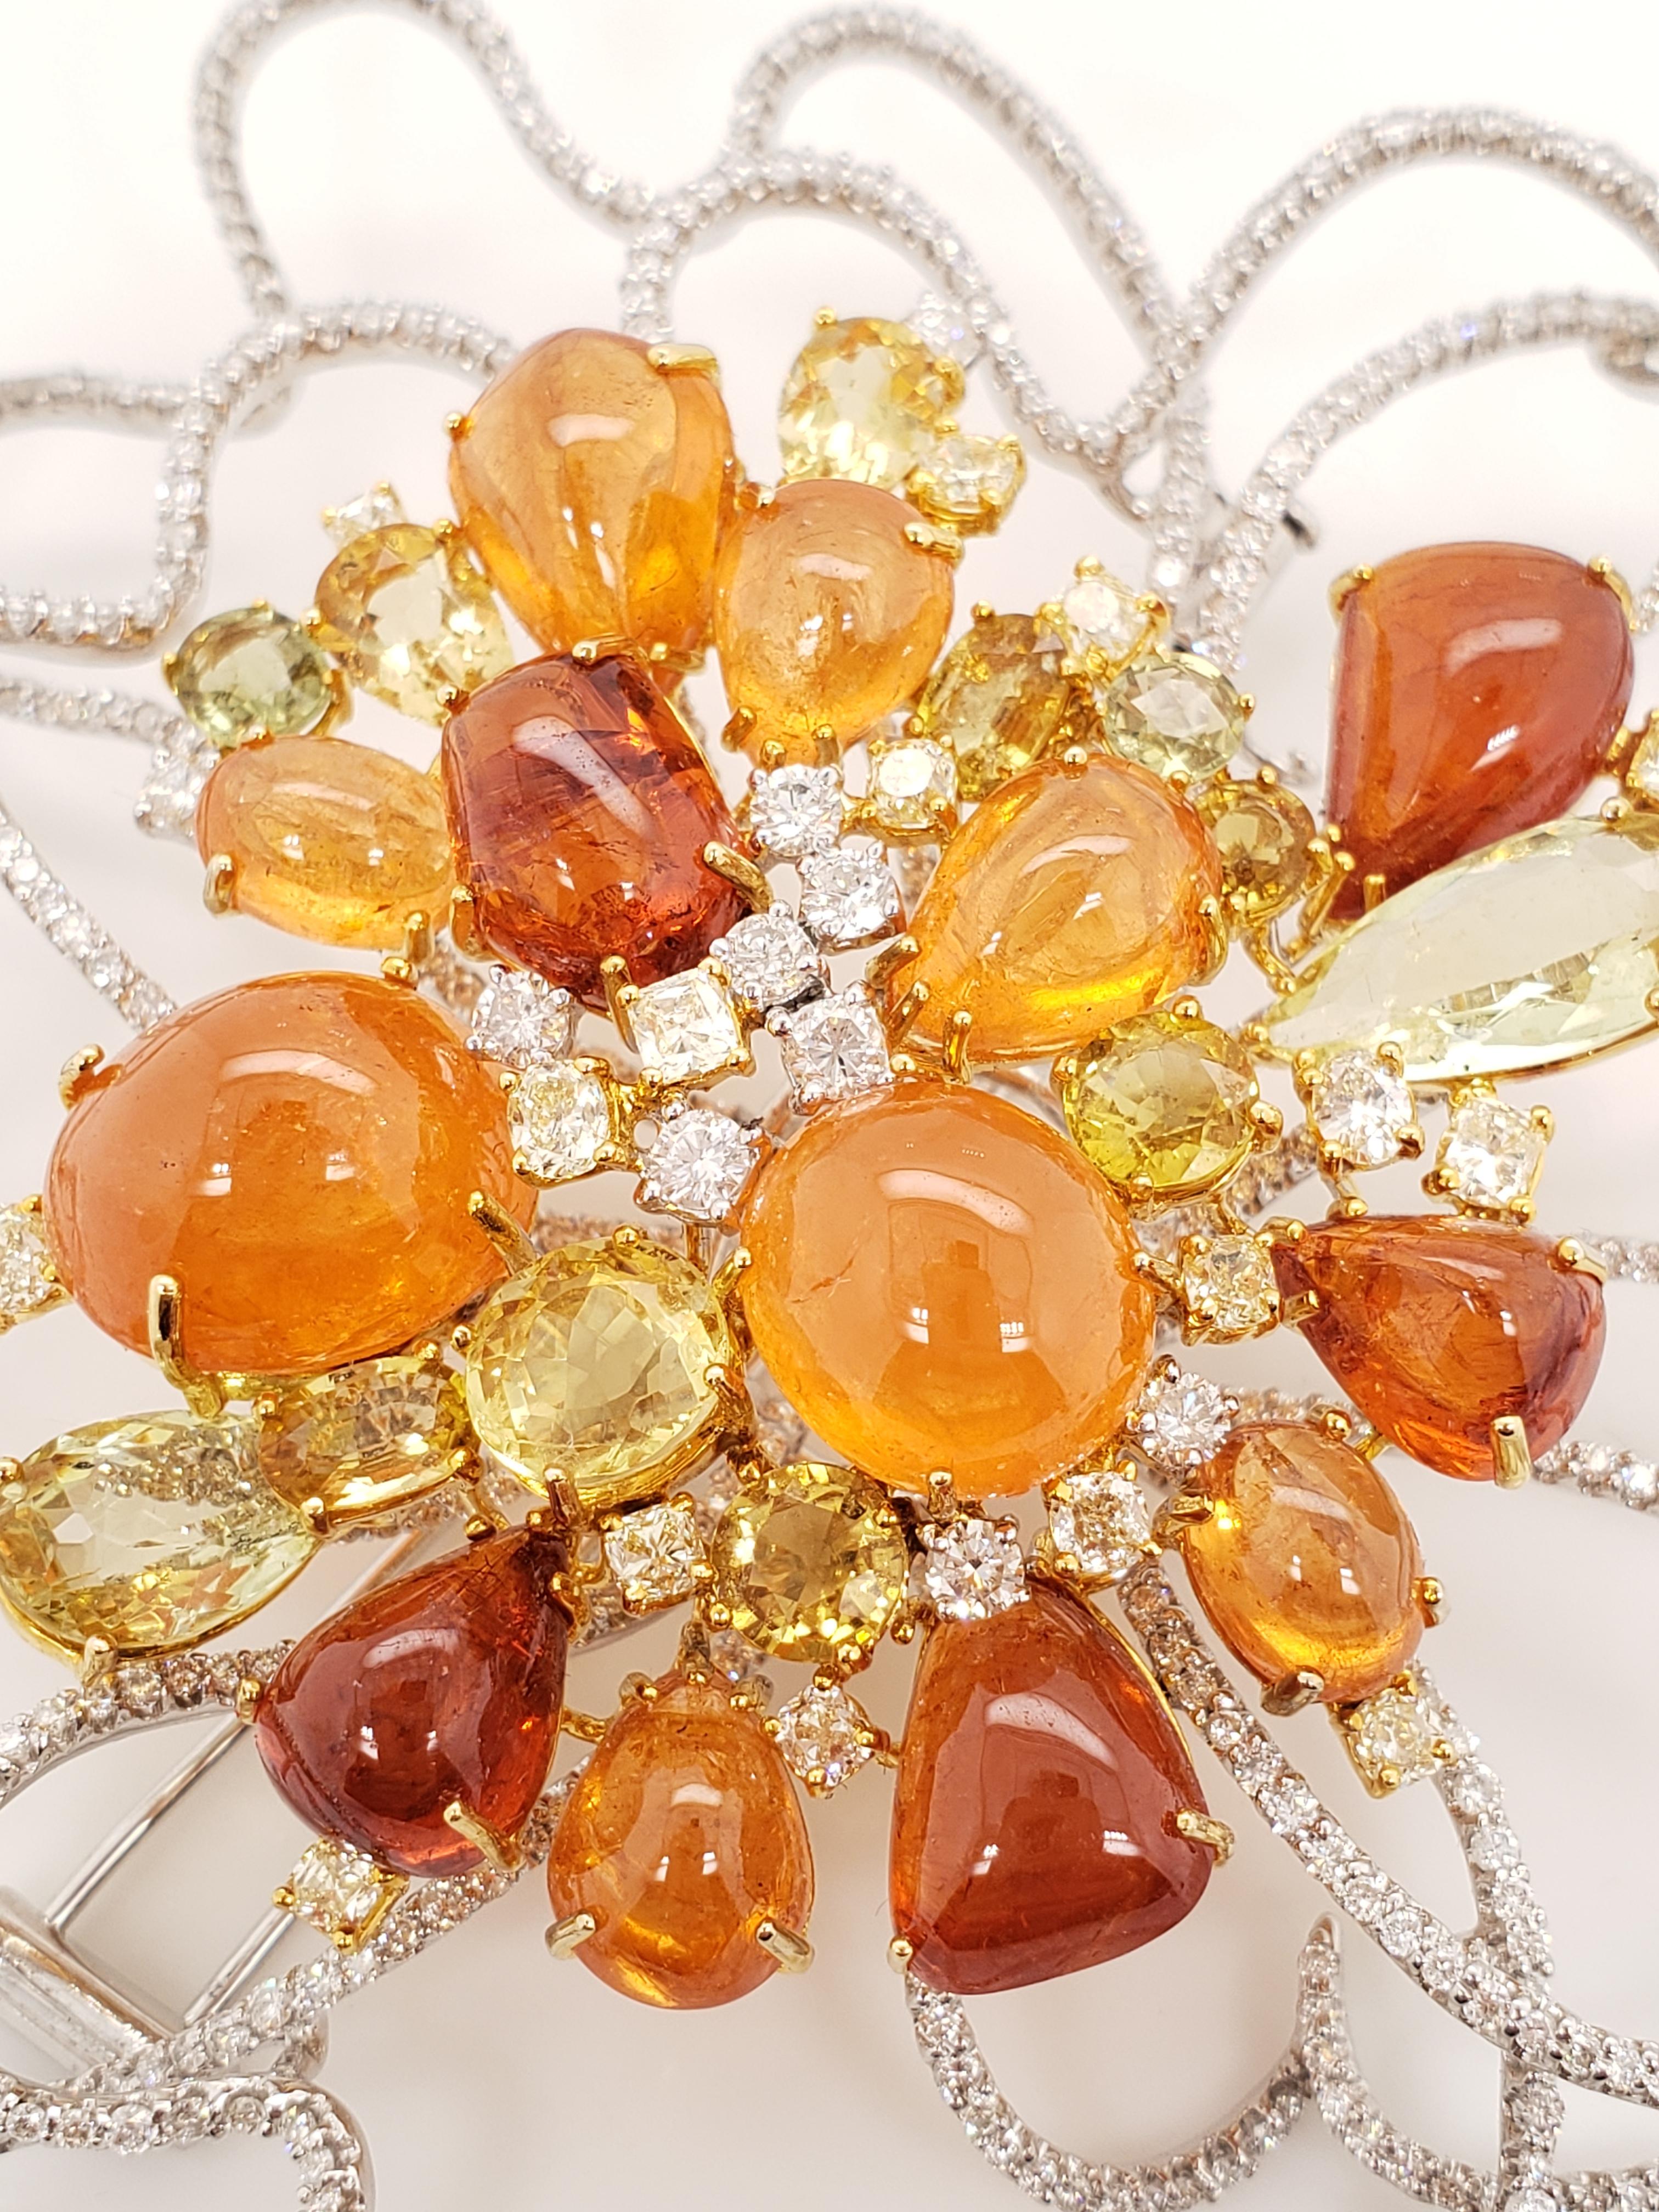 This magnificently colorful cluster brooch contains Orange Tourmaline, Hessonite, Garnet, Yellow Sapphire and approximately 10.00 carats of White diamonds on a delicate pavé wire. Hand-crafted in 18K White & Yellow Gold.

This one of a kind brooch